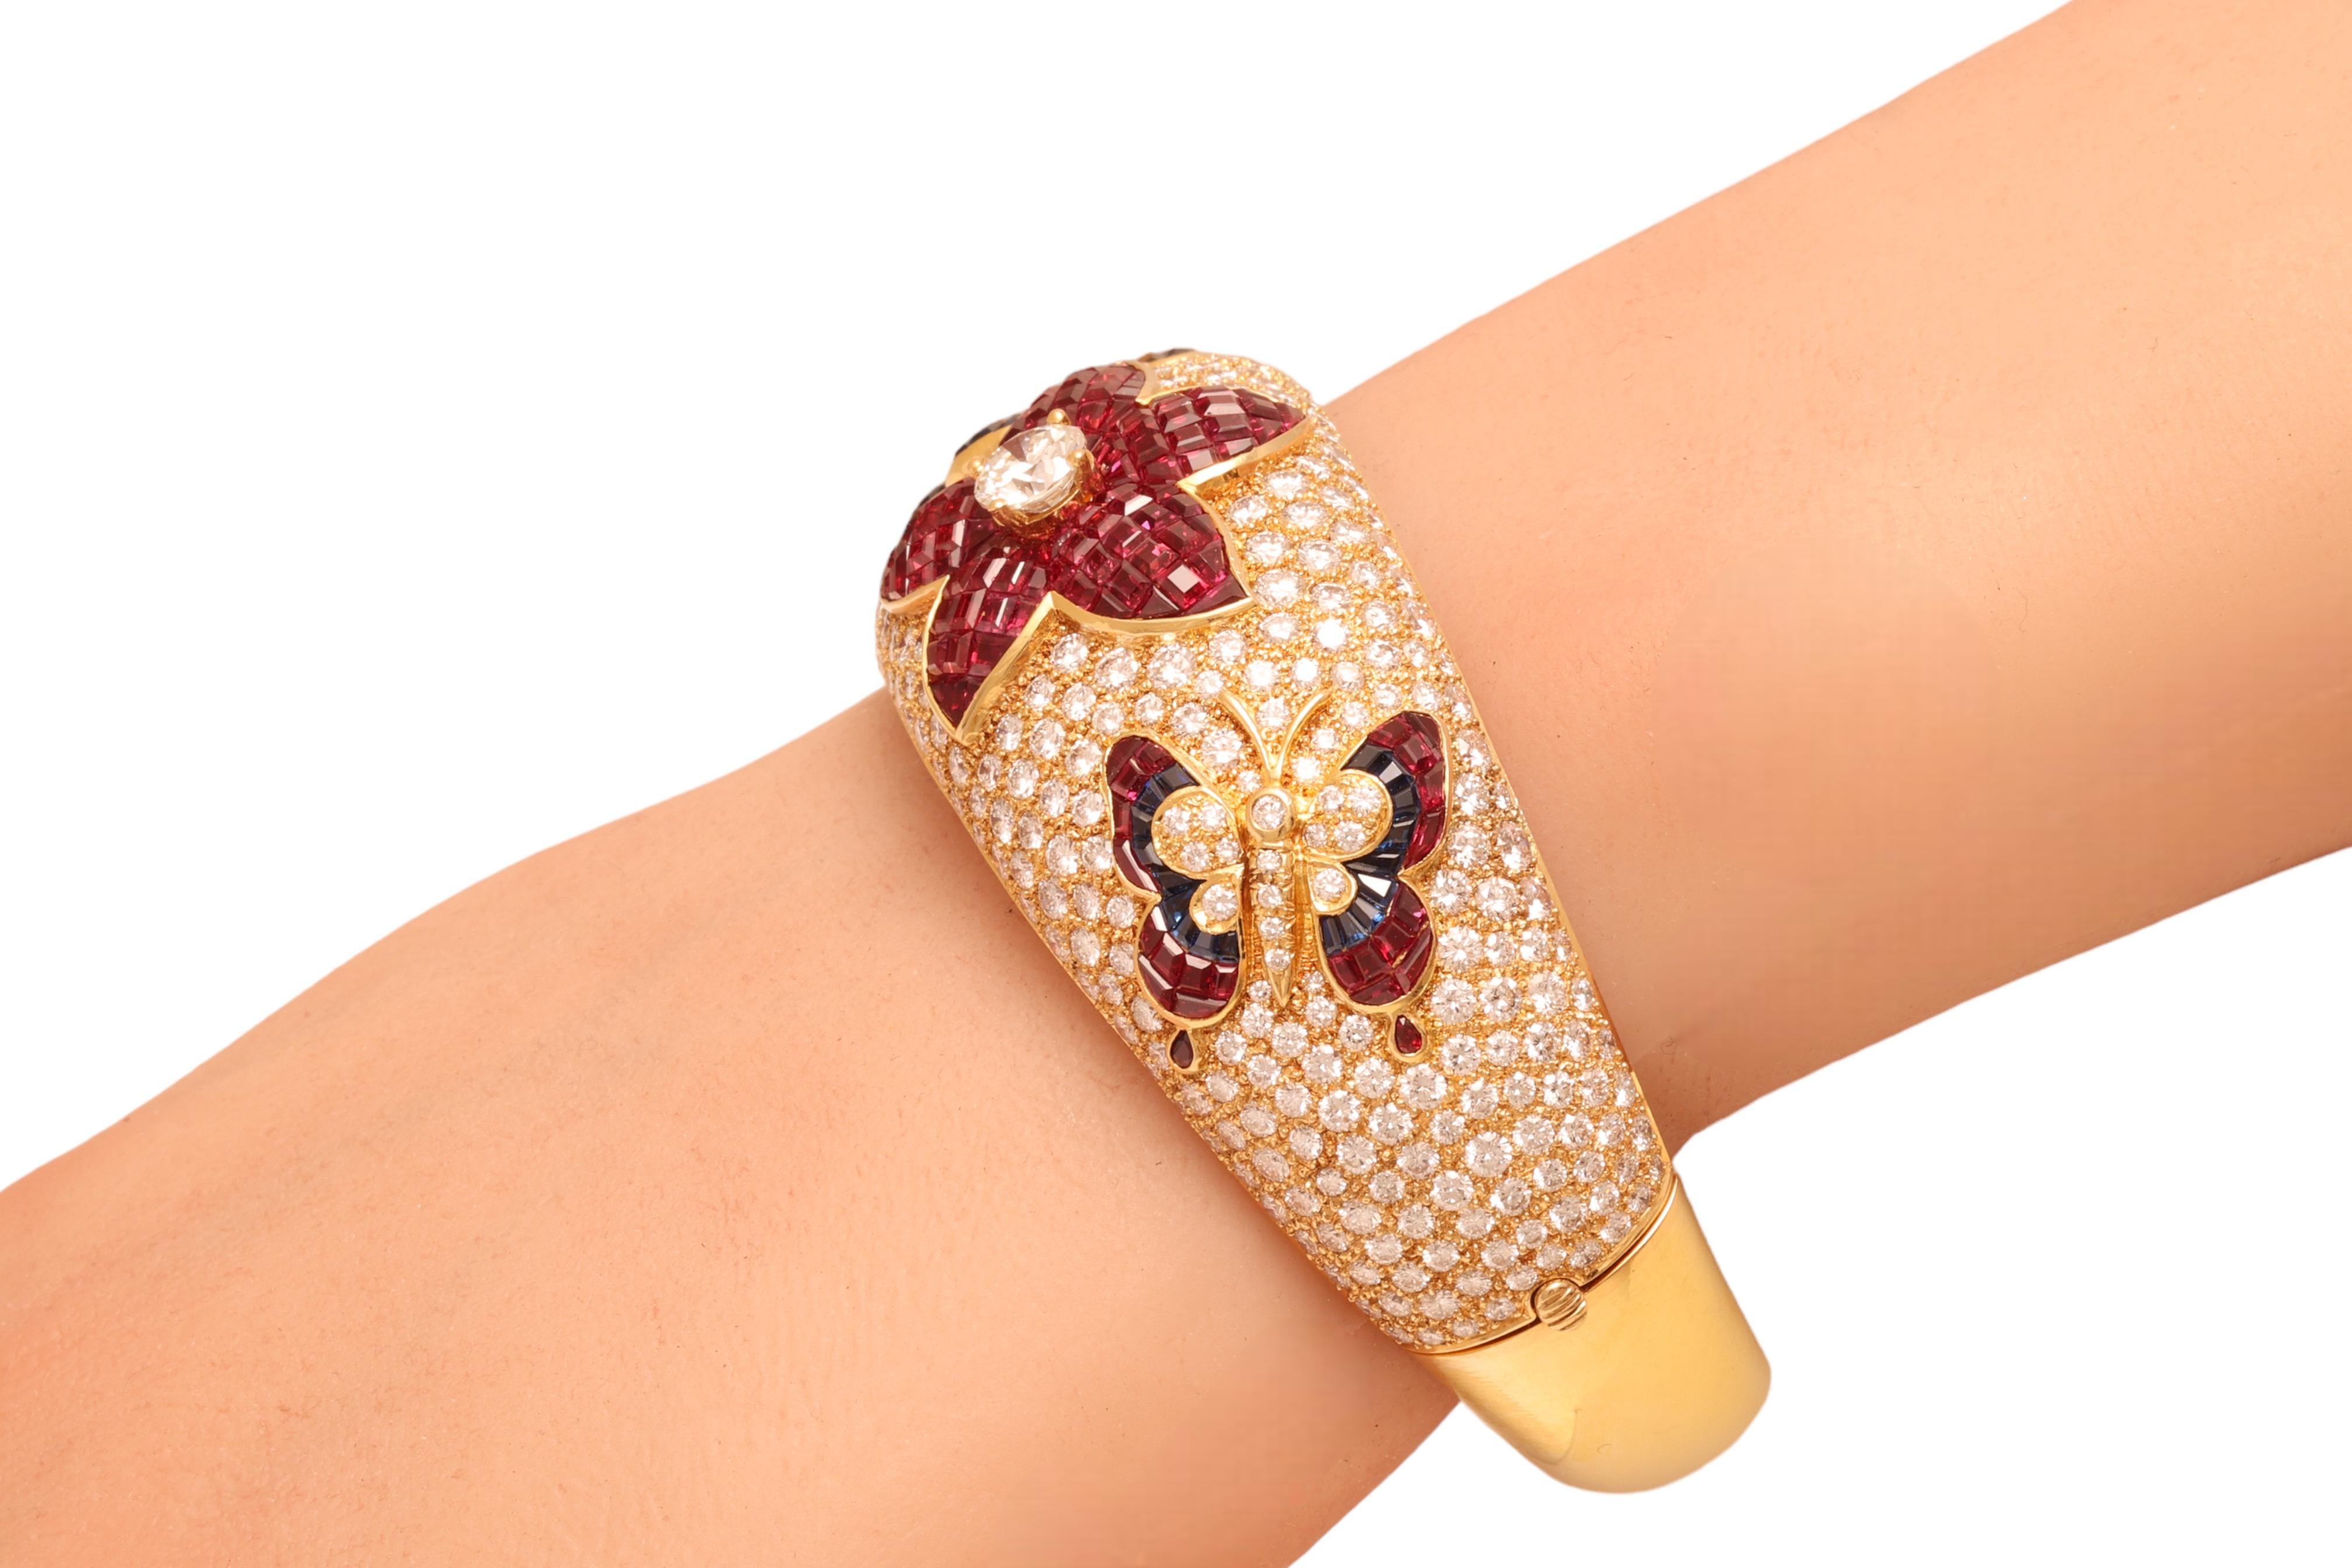 18 kt. Yellow Gold Wide Bangle Bracelet With Diamonds, Rubies, Sapphires For Sale 8